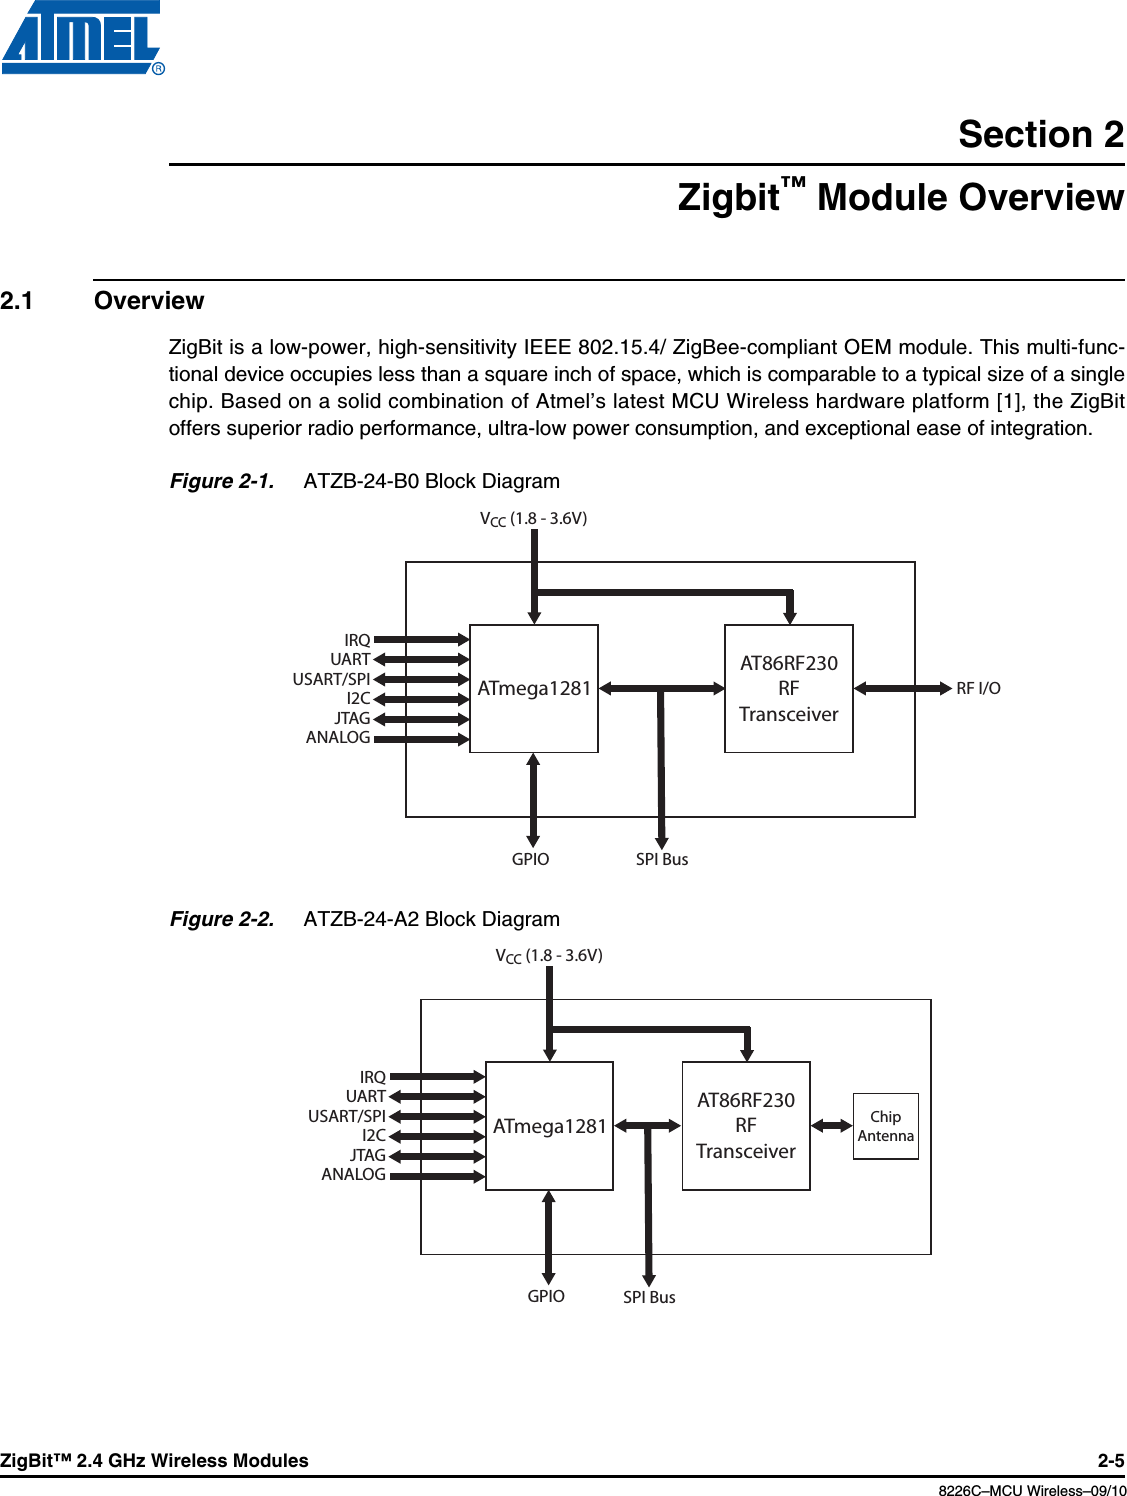 ZigBit™ 2.4 GHz Wireless Modules 2-58226C–MCU Wireless–09/10Section 2Zigbit™ Module Overview2.1 OverviewZigBit is a low-power, high-sensitivity IEEE 802.15.4/ ZigBee-compliant OEM module. This multi-func-tional device occupies less than a square inch of space, which is comparable to a typical size of a singlechip. Based on a solid combination of Atmel’s latest MCU Wireless hardware platform [1], the ZigBitoffers superior radio performance, ultra-low power consumption, and exceptional ease of integration.Figure 2-1.  ATZB-24-B0 Block DiagramFigure 2-2.  ATZB-24-A2 Block DiagramATmega1281AT86RF230RFTransceiverVCC (1.8 - 3.6V)RF I/OGPIO SPI BusIRQUARTUSART/SPII2CJTAGANALOGATmega1281AT86RF230RFTransceiverVCC (1.8 - 3.6V)GPIO SPI BusIRQUARTUSART/SPII2CJTAGANALOGChipAntenna